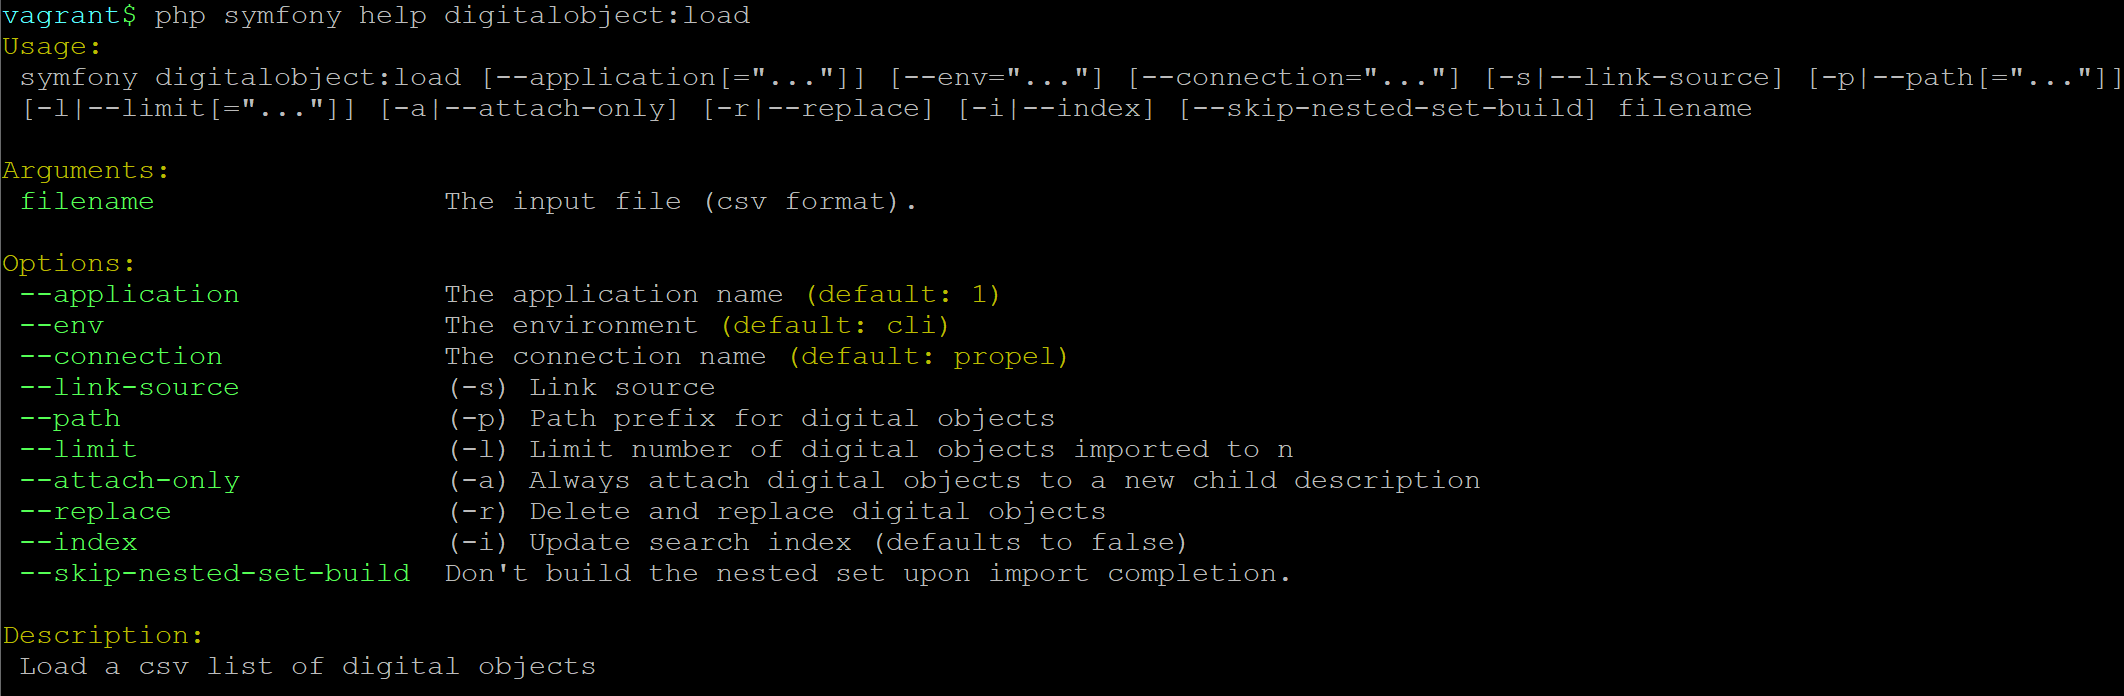 An image of the command-line options for digitalobject:load